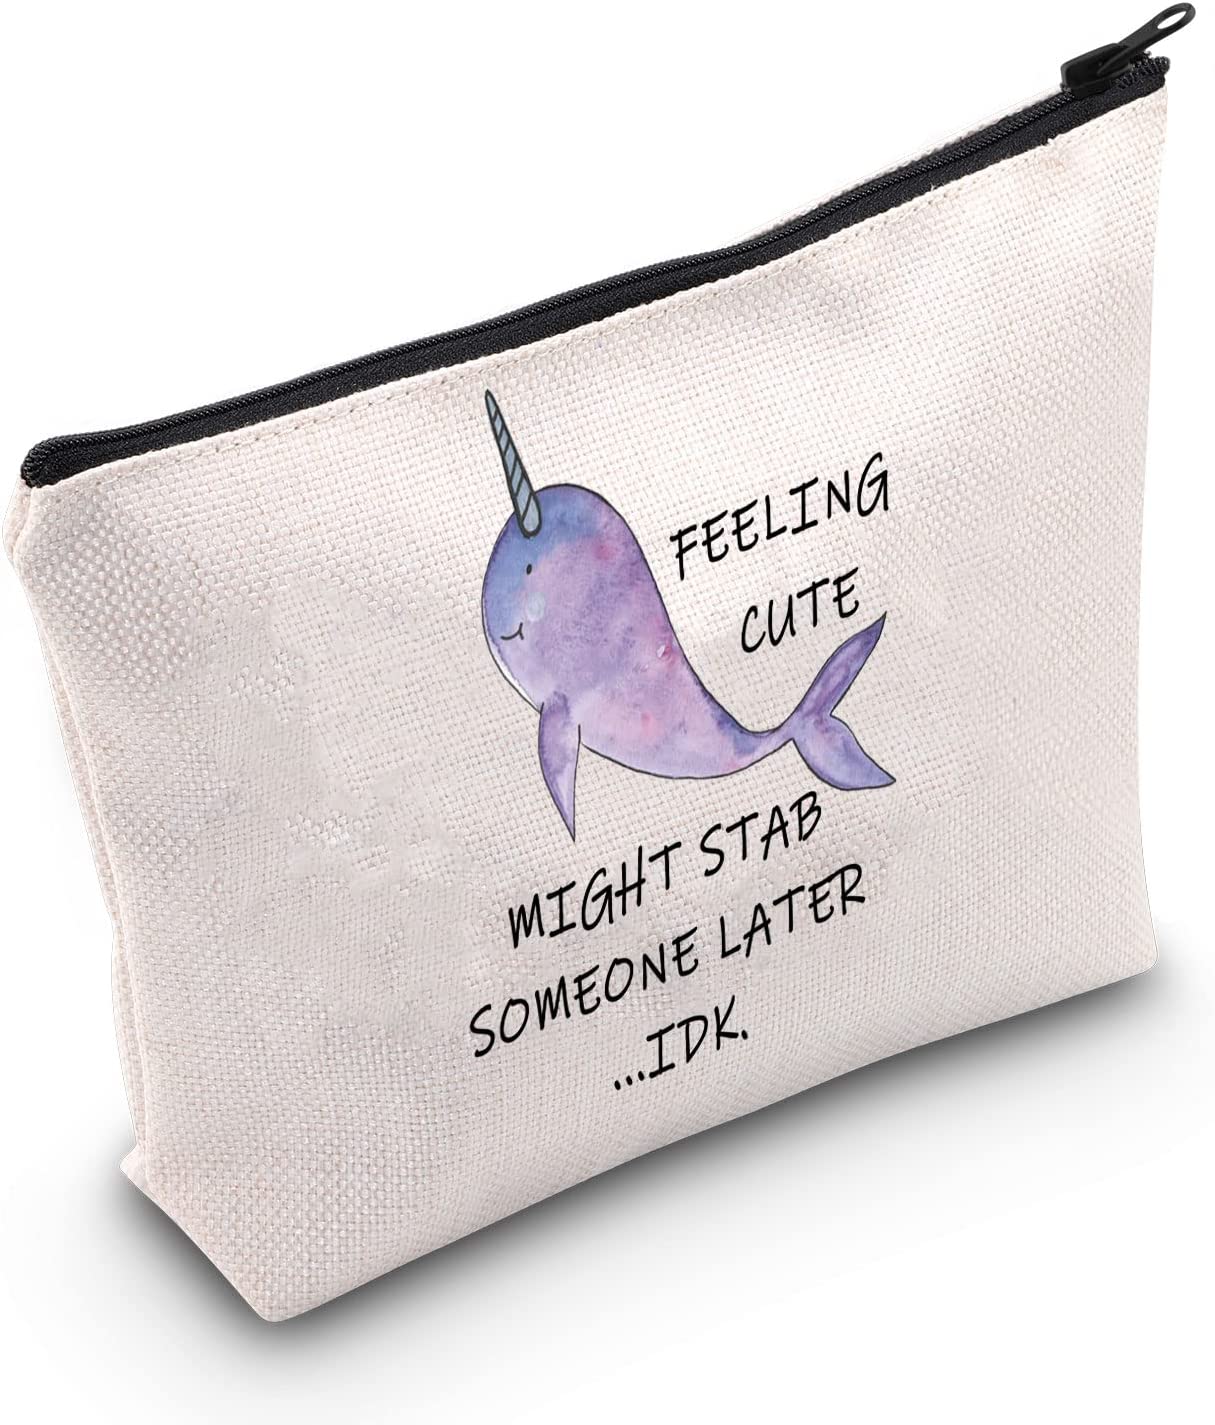 The perfect gift for your sassy friend who loves narwals.